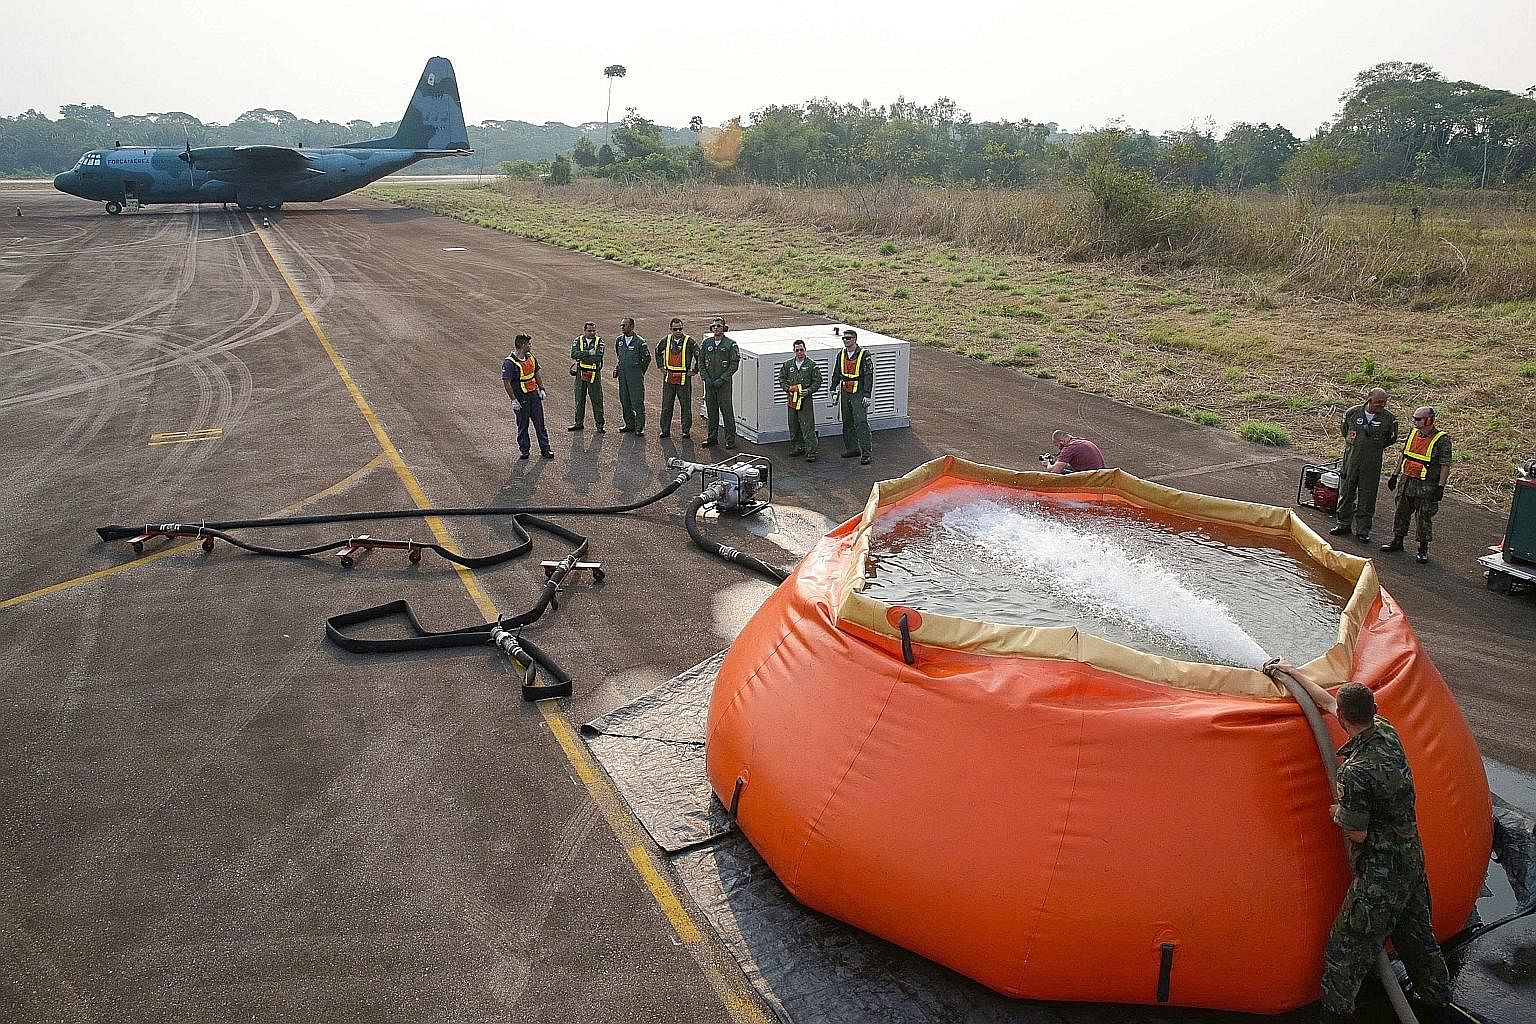 A Hercules C-130 aircraft of the Brazilian Air Force waiting to collect giant water bags to fight fires in the Amazon rainforest, in the state of Rondonia, one of the states most affected by the wildfire crisis. About 60 per cent of the Amazon is in 